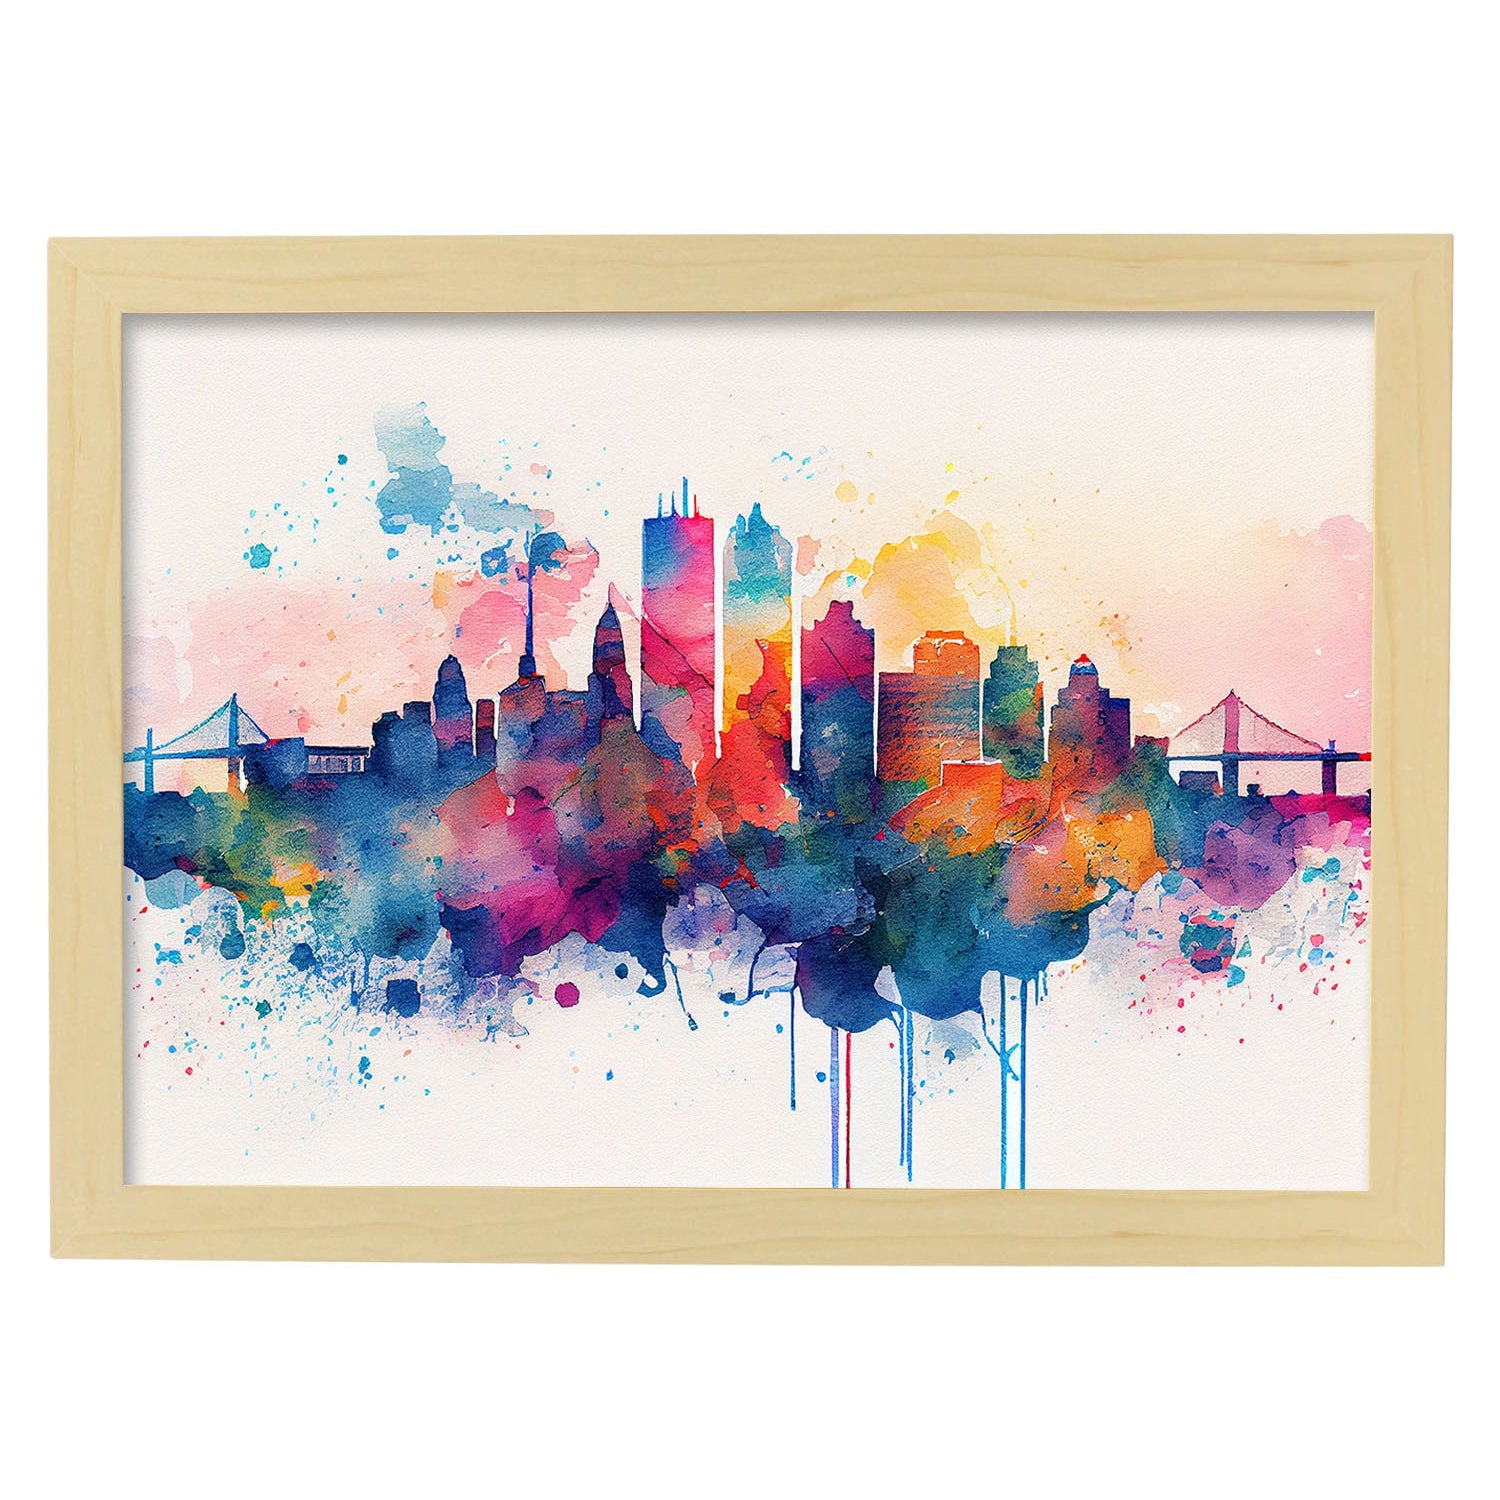 Nacnic watercolor of a skyline of the city of Boston_1. Aesthetic Wall Art Prints for Bedroom or Living Room Design.-Artwork-Nacnic-A4-Marco Madera Clara-Nacnic Estudio SL